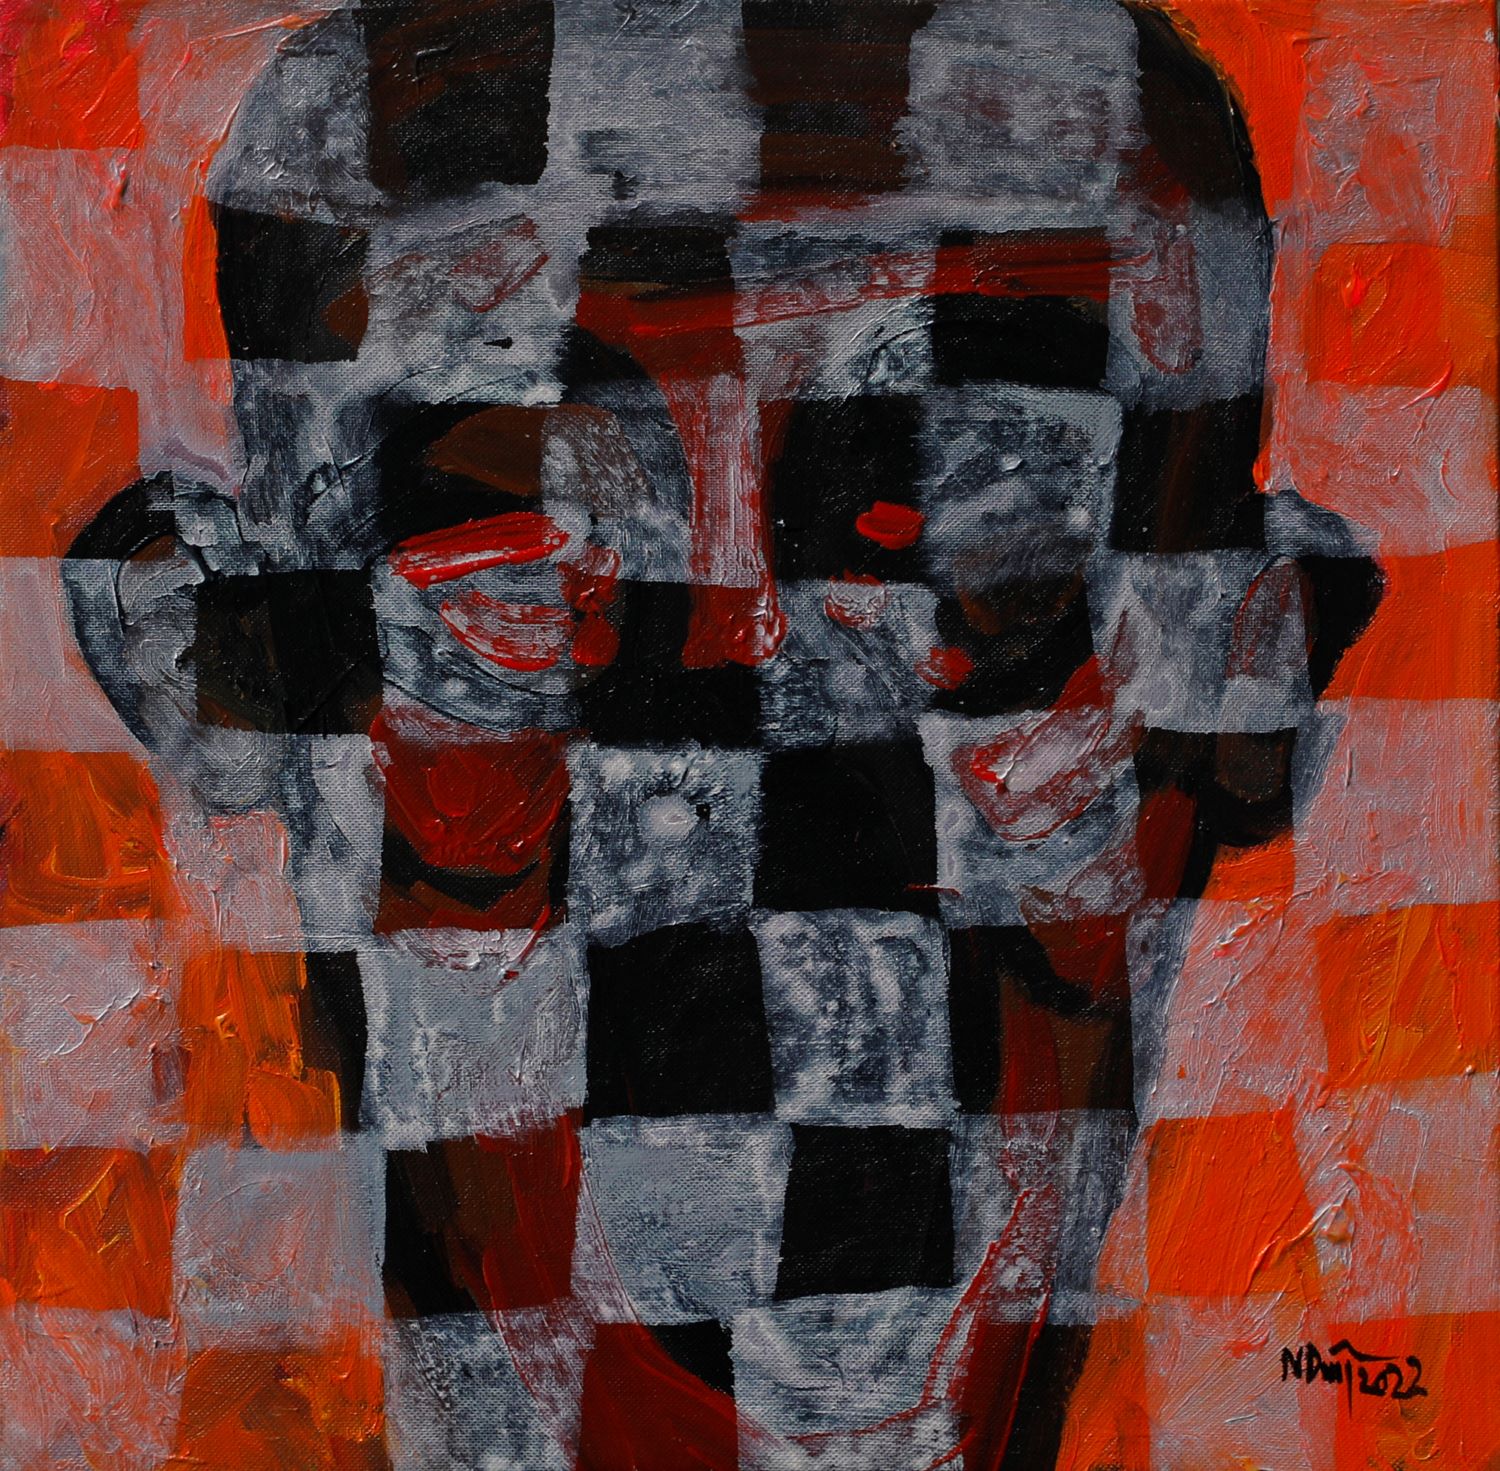 Chess Portrait II - Vietnamese Acrylic Painting by Artist Hoang Ngoc Dung